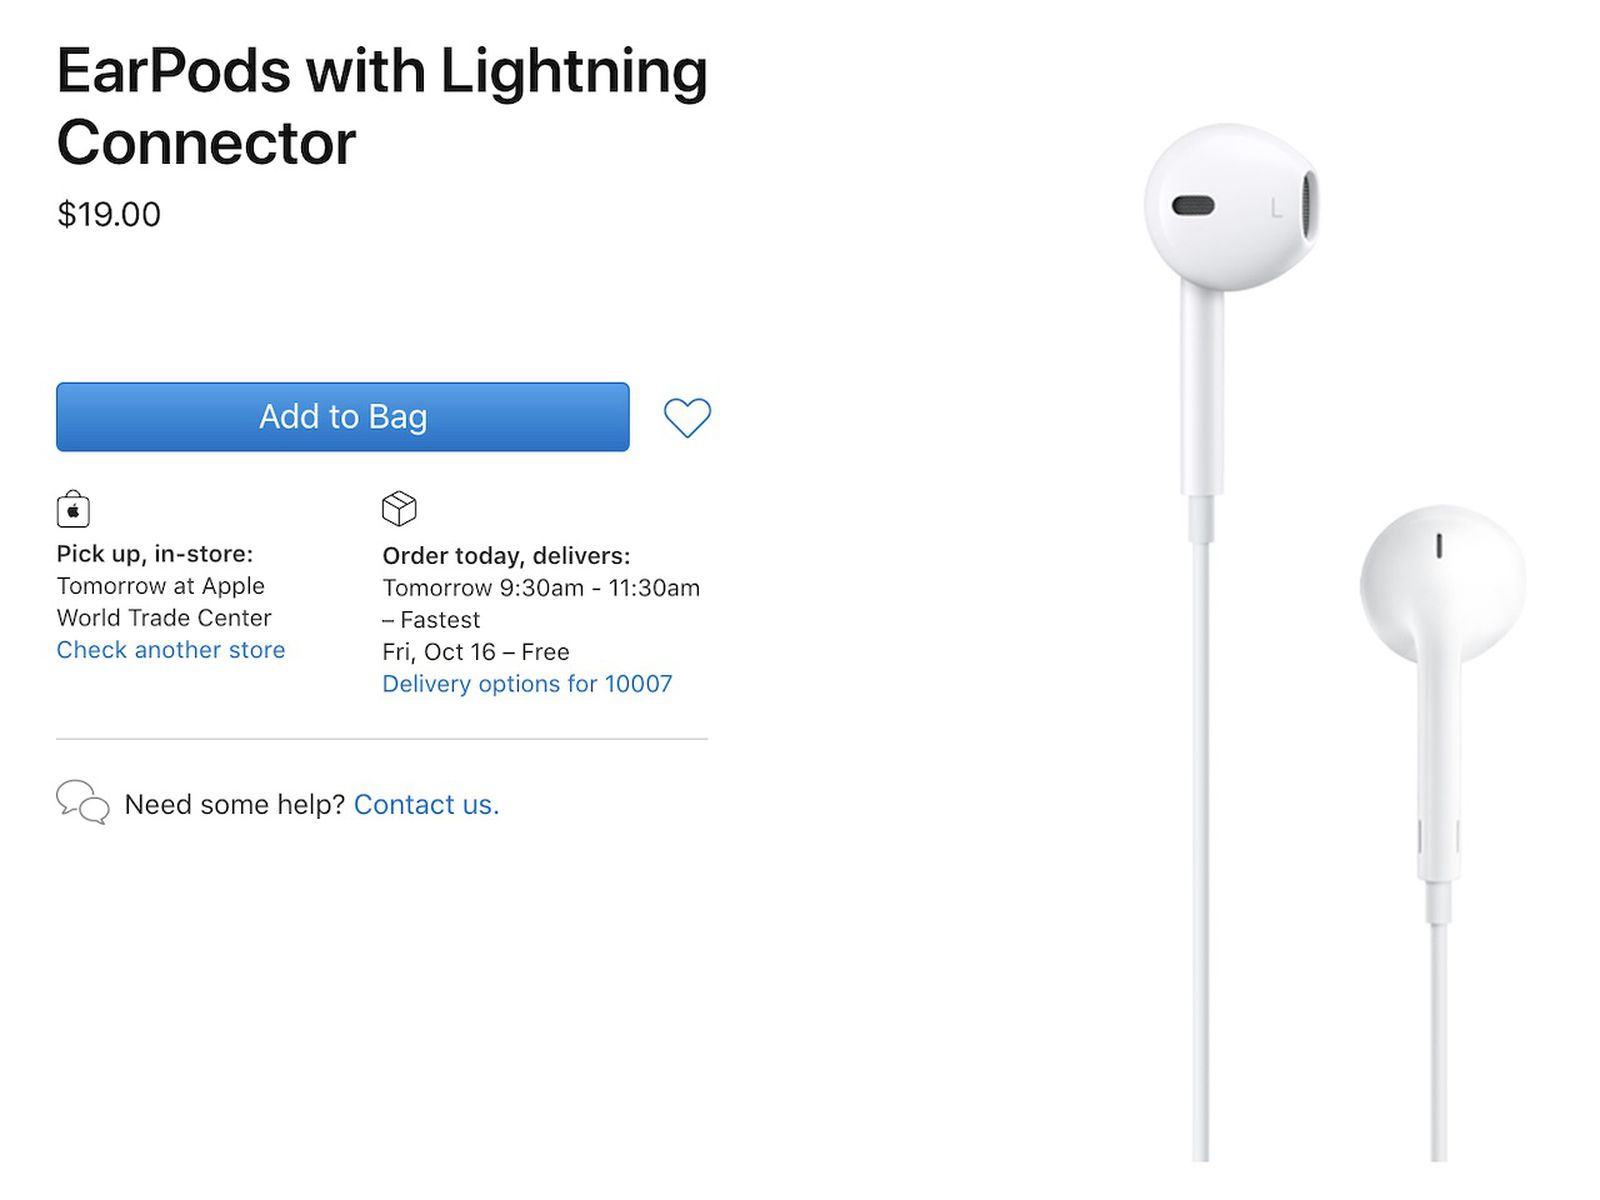 https://images.macrumors.com/t/2aazdsnUskrg2gfBb51-tfSWxDs=/1600x1200/smart/article-new/2020/10/earpods-lower-price.jpg